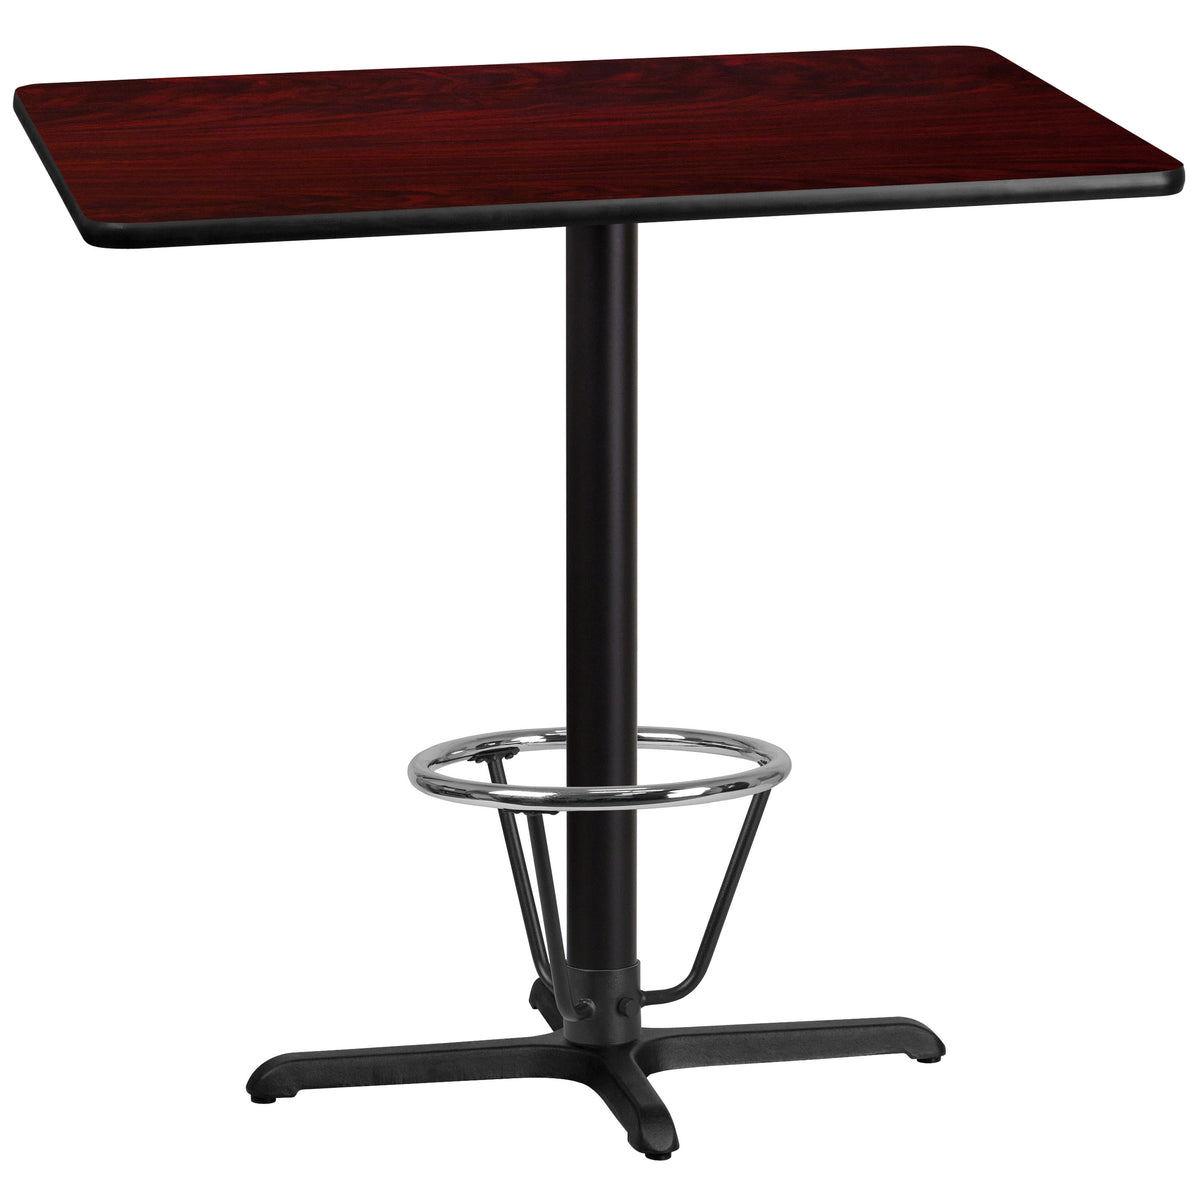 Mahogany |#| 30inch x 42inch Laminate Table Top & 23.5inch x 29.5inch Bar Height Base with Foot Ring